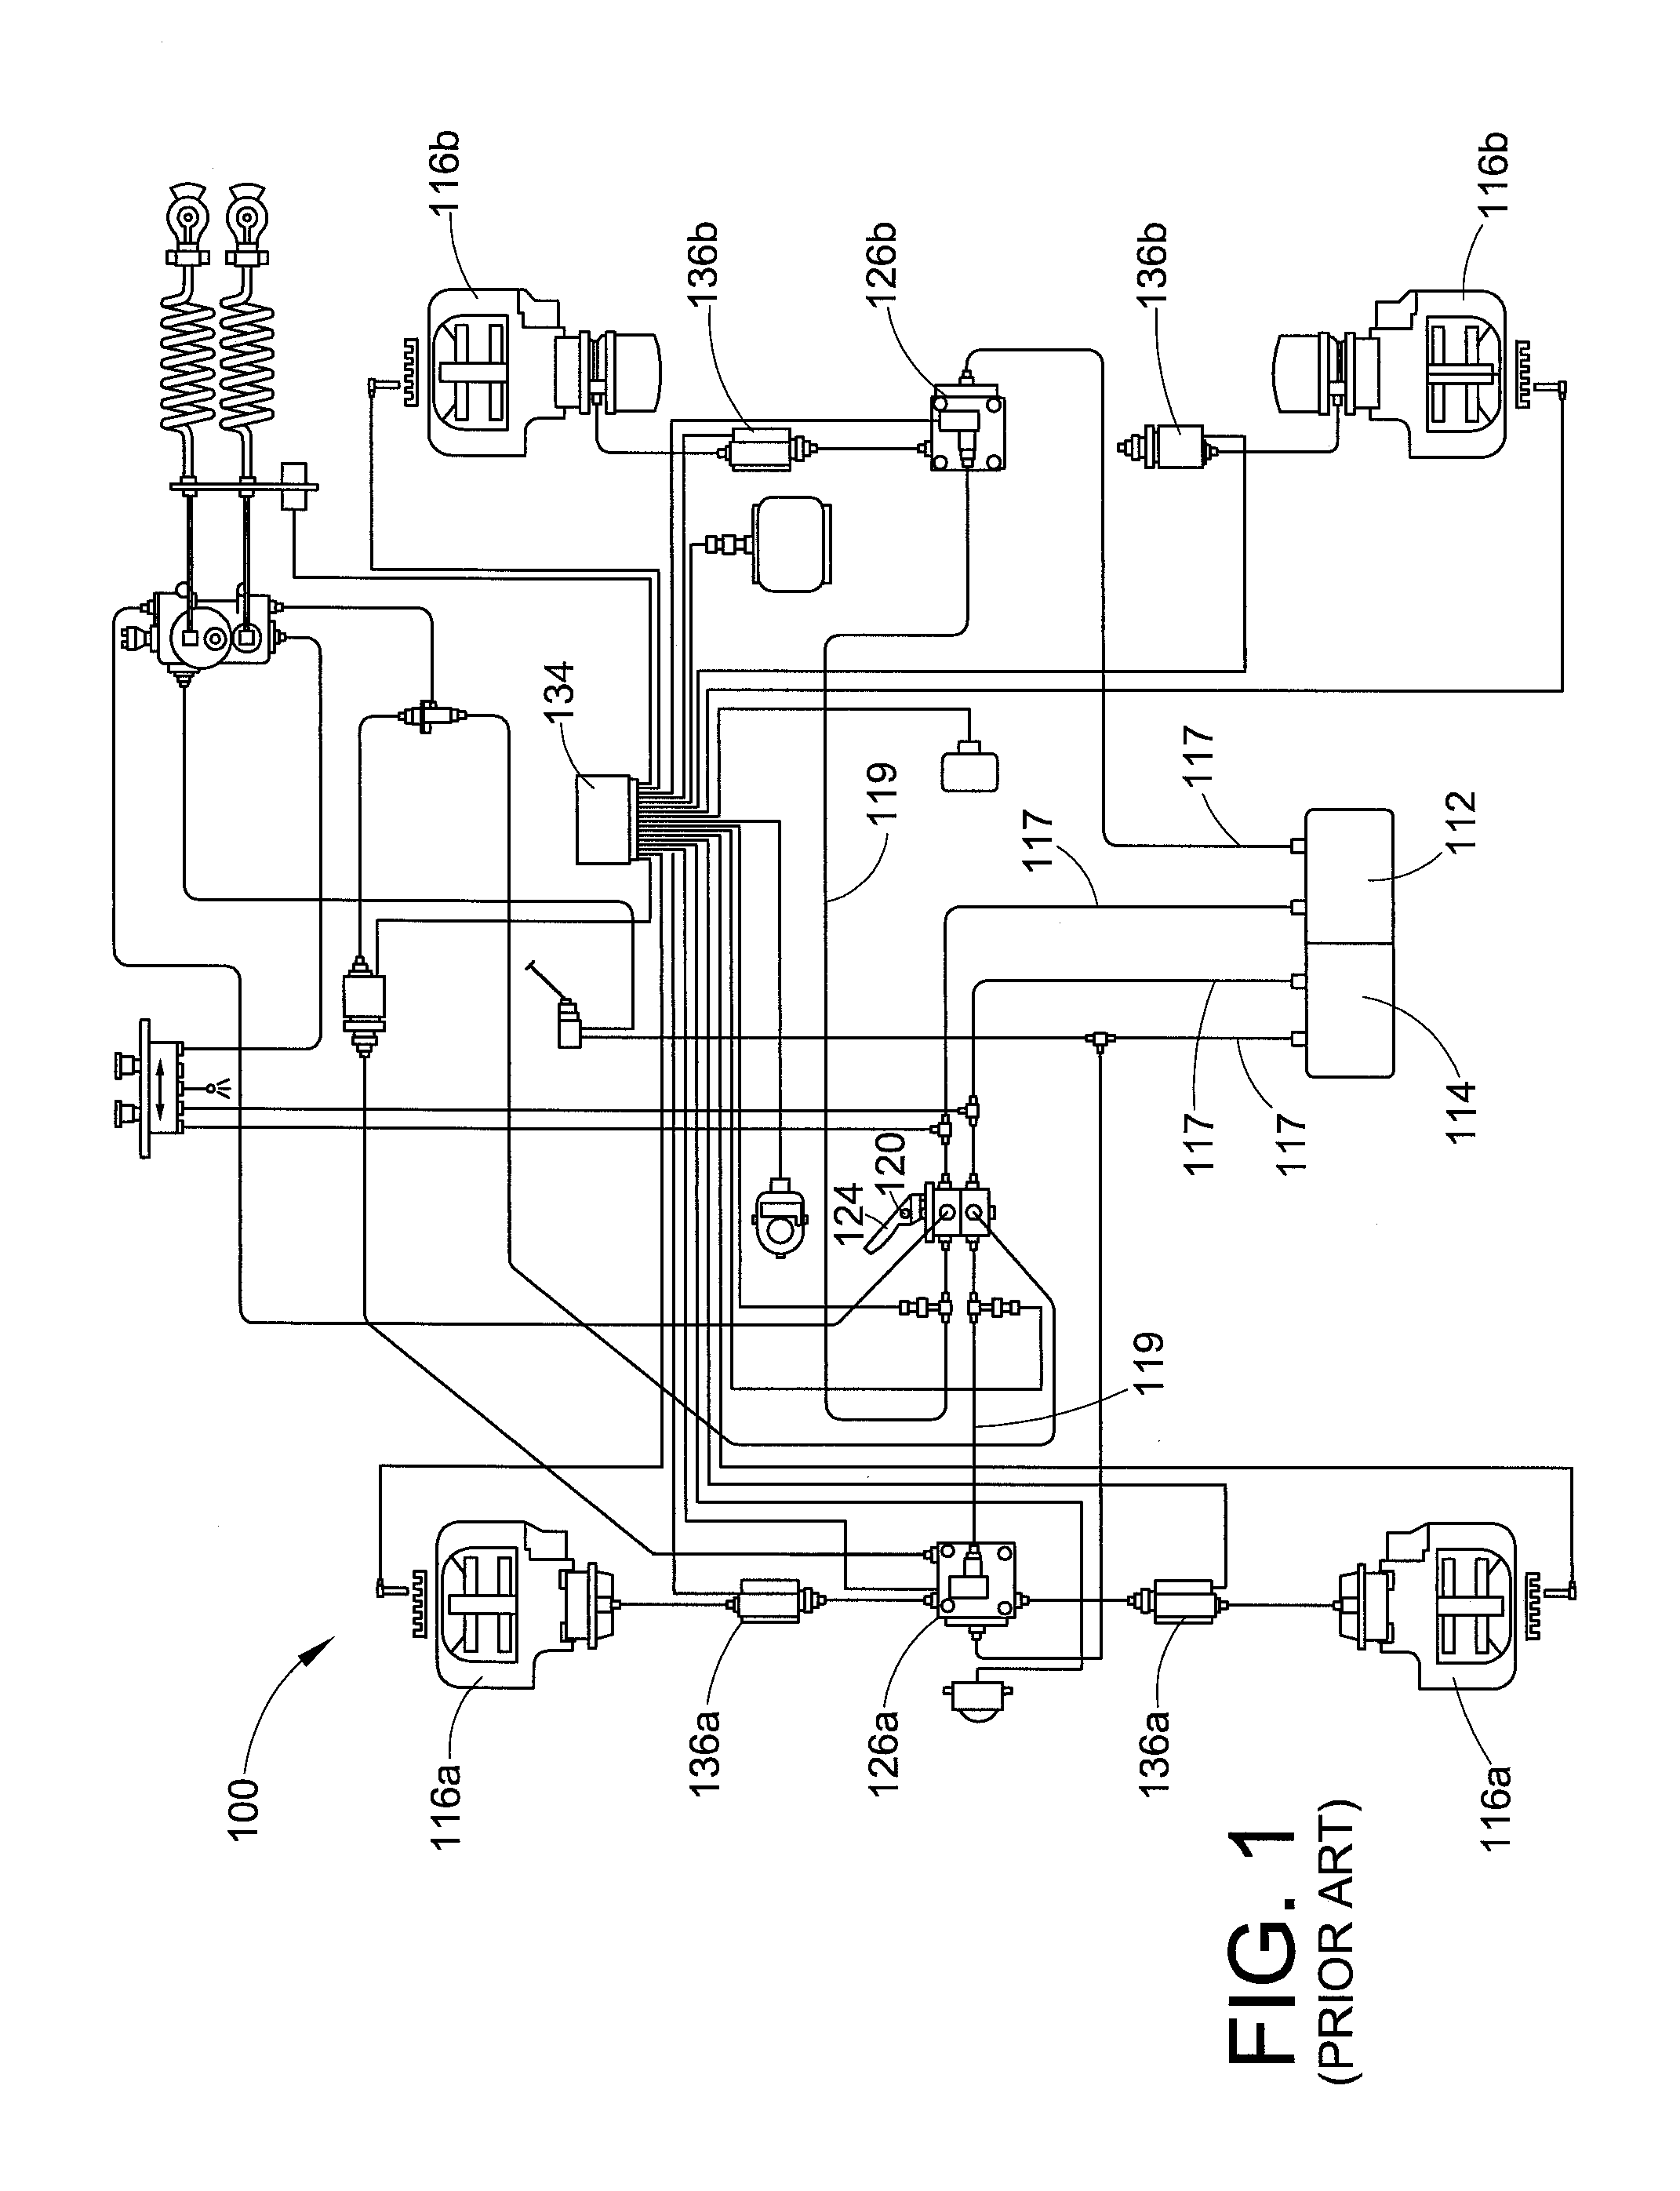 Automatic traction relay valve diagnostic using pressure transducer feedback